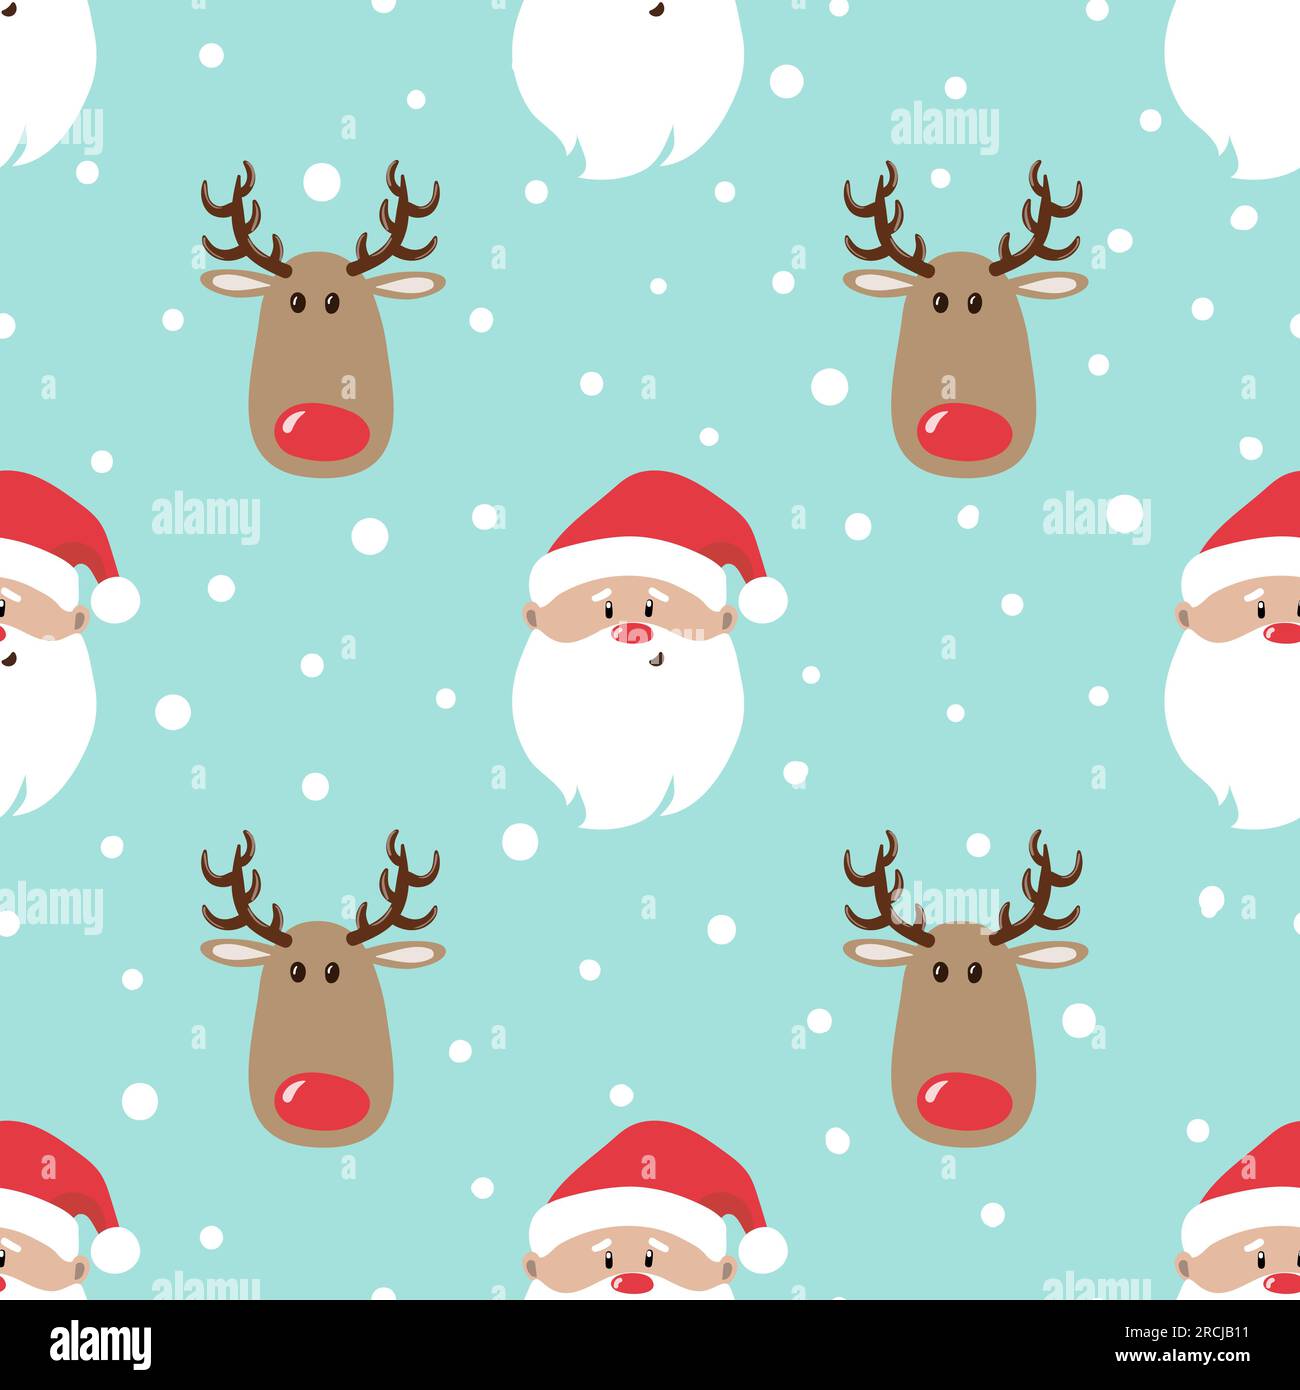 Seamless Christmas pattern, Love concept. Design for wrapping